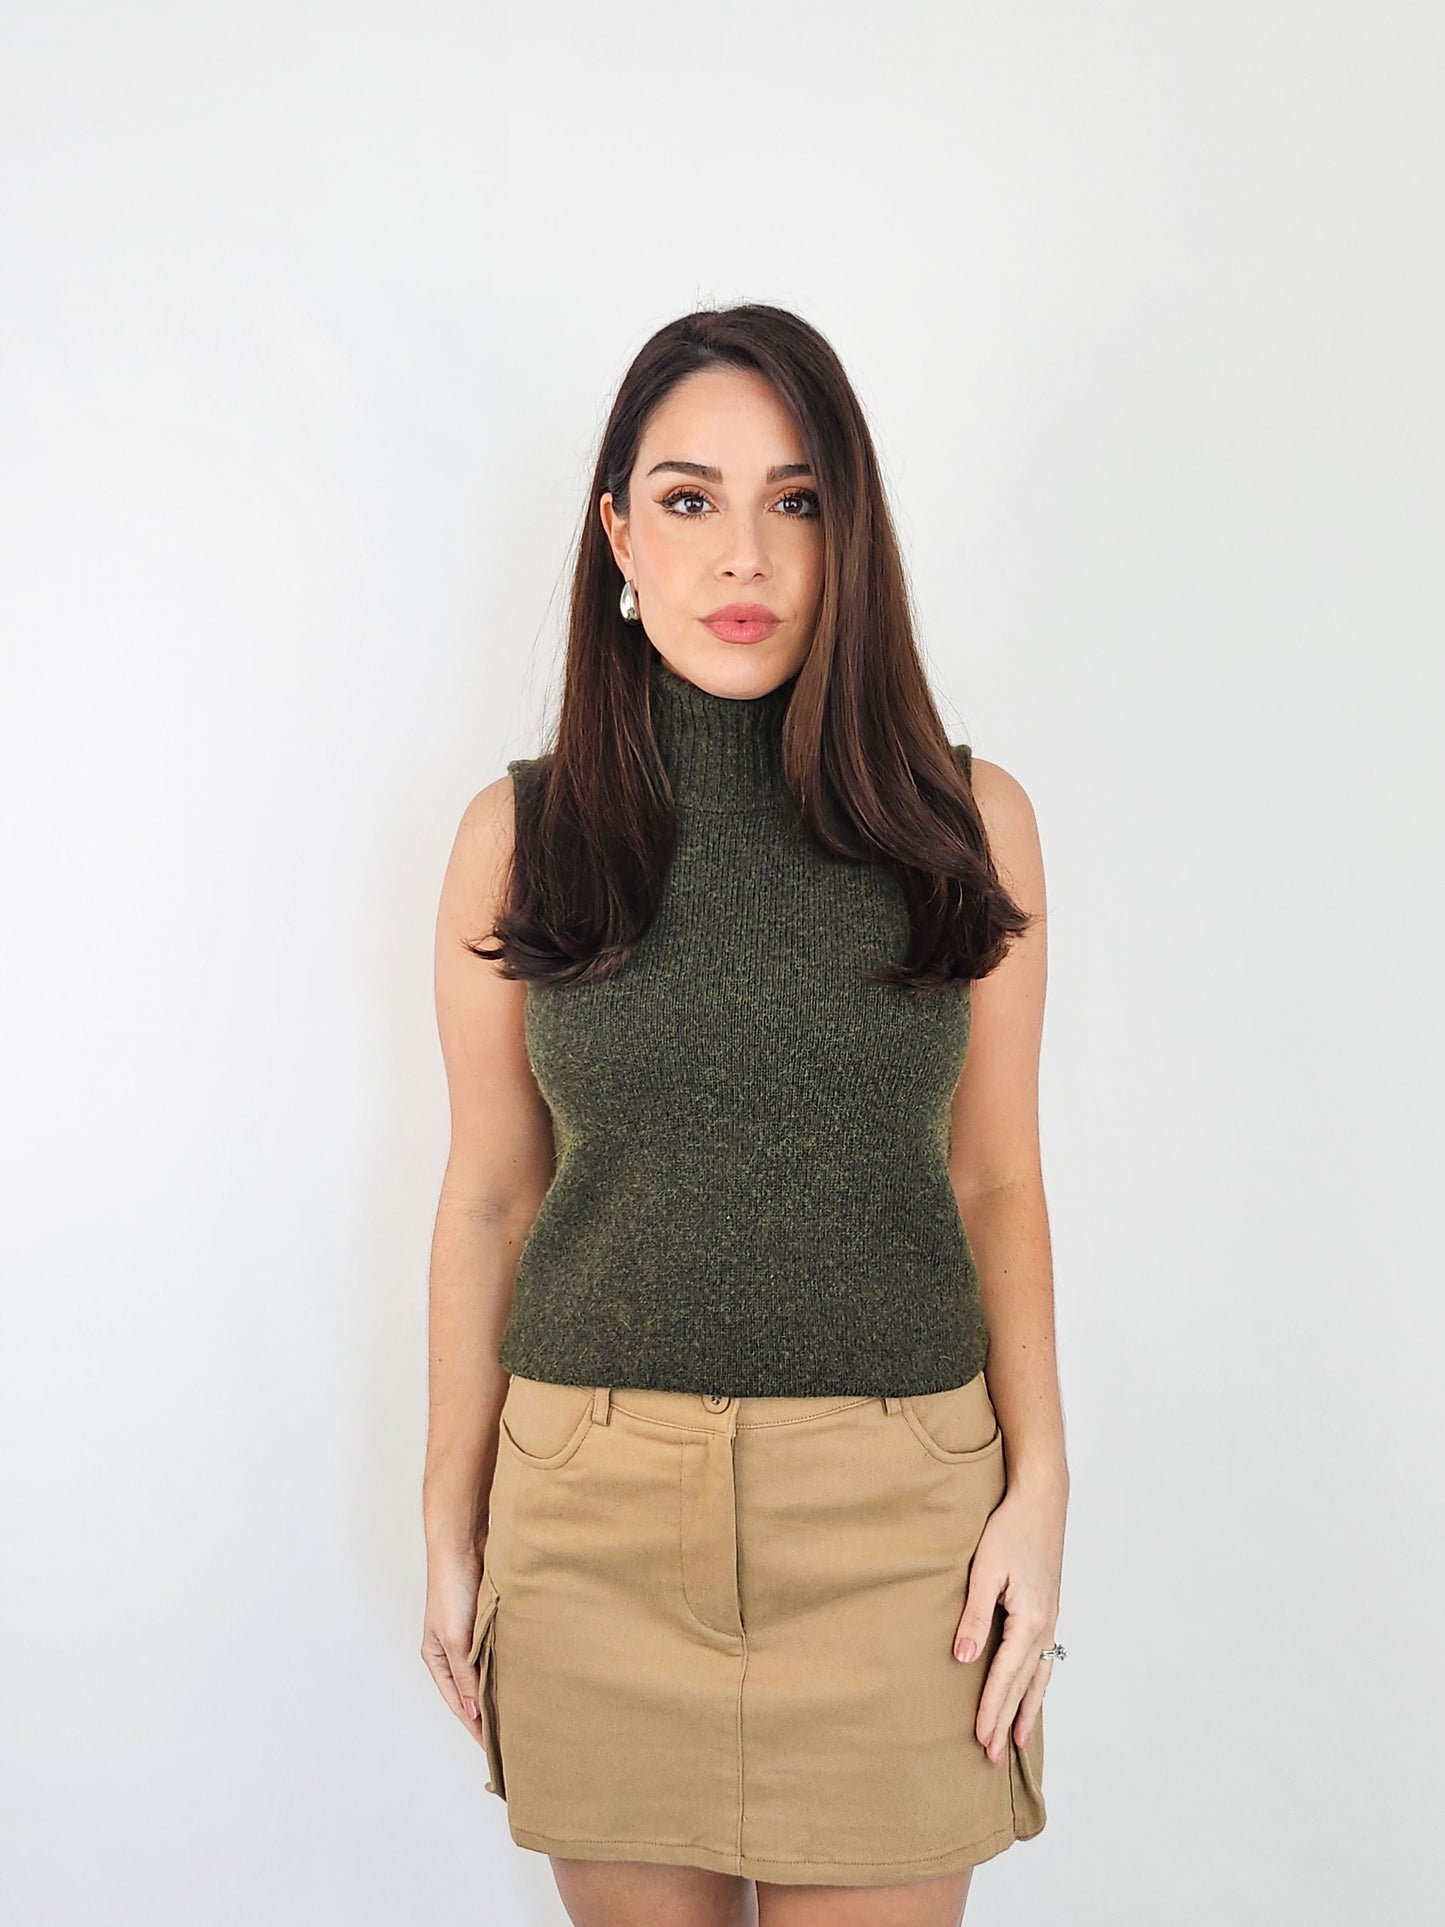 Khaki cargo skirt is a great piece to have in your wardrobe for Fall. Paired this with a  sleeveless turtleneck sweater for a causal yet sophisticated look. 